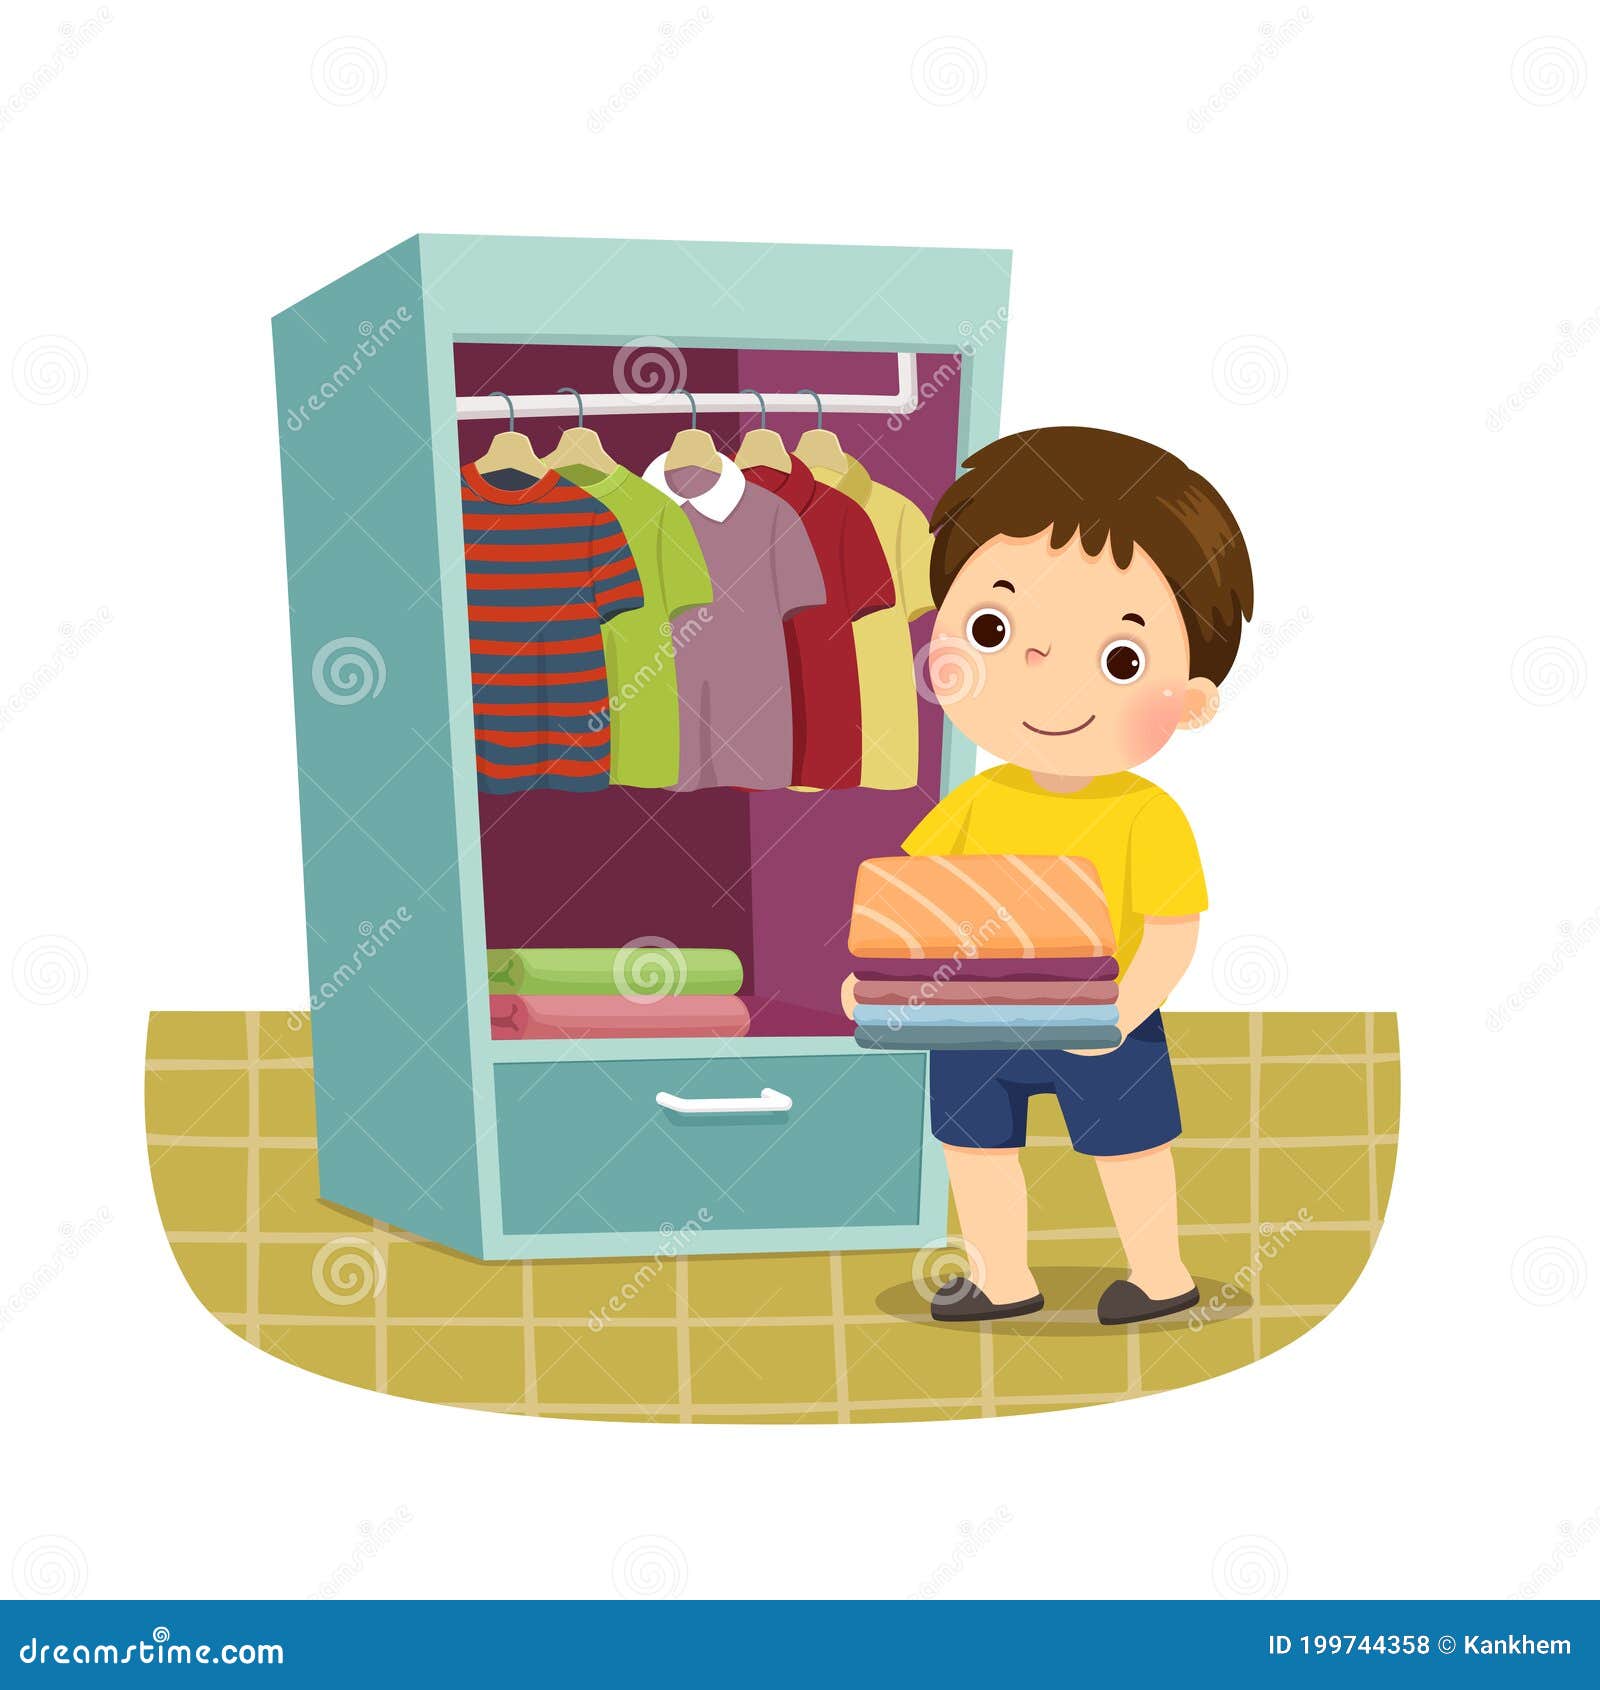 Cartoon of a Little Boy Putting Stack of Folded Clothes in Closet. Kids  Doing Housework Chores at Home Concept Stock Vector - Illustration of  household, clip: 199744358